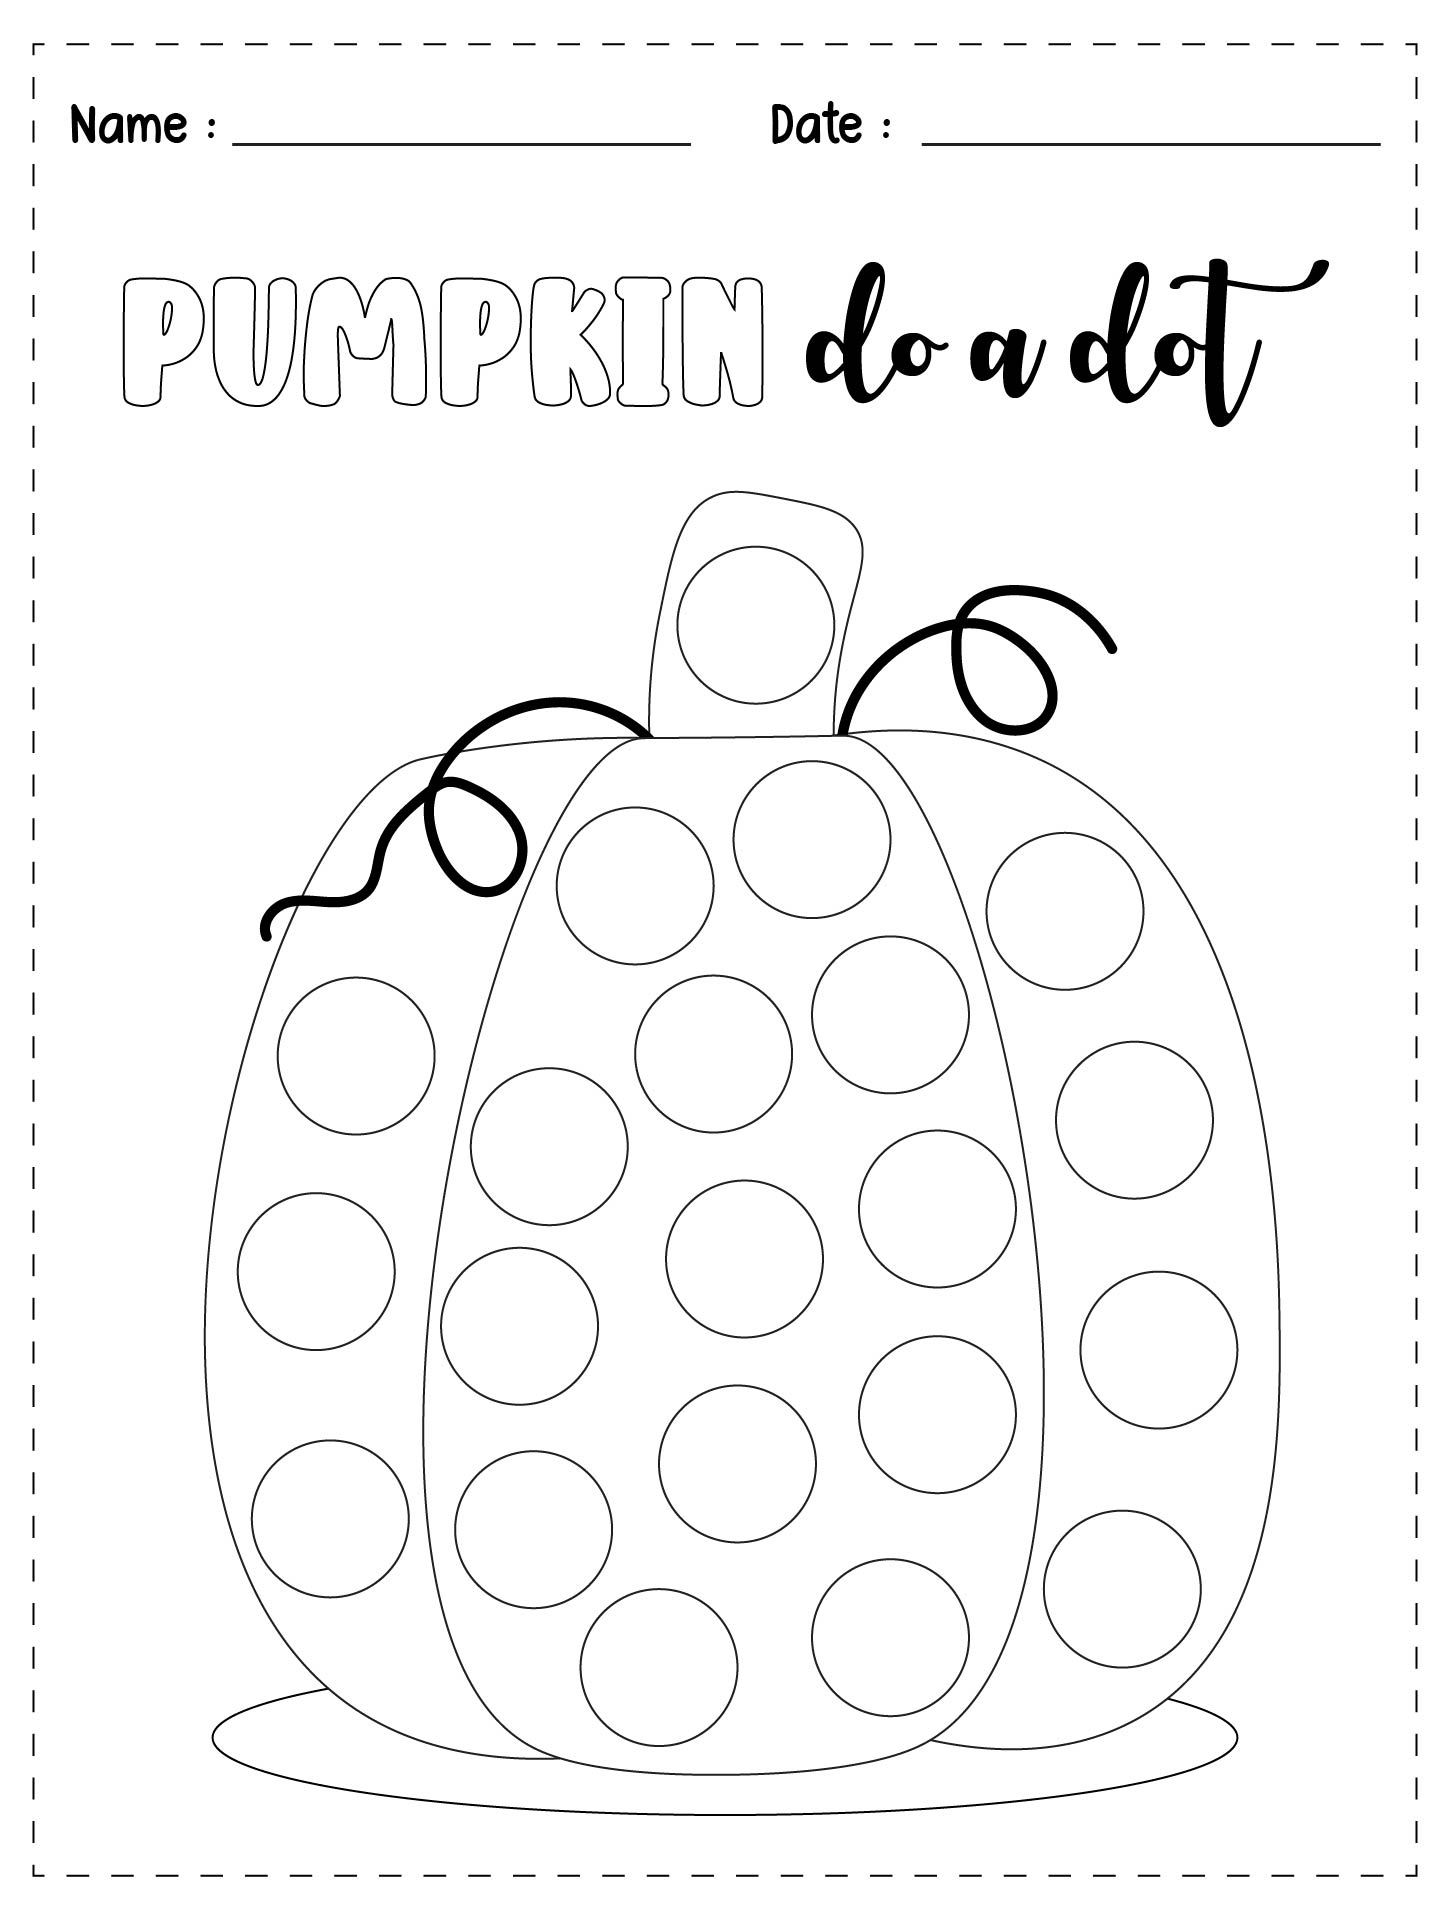 Bingo Dot Marker Coloring Pages